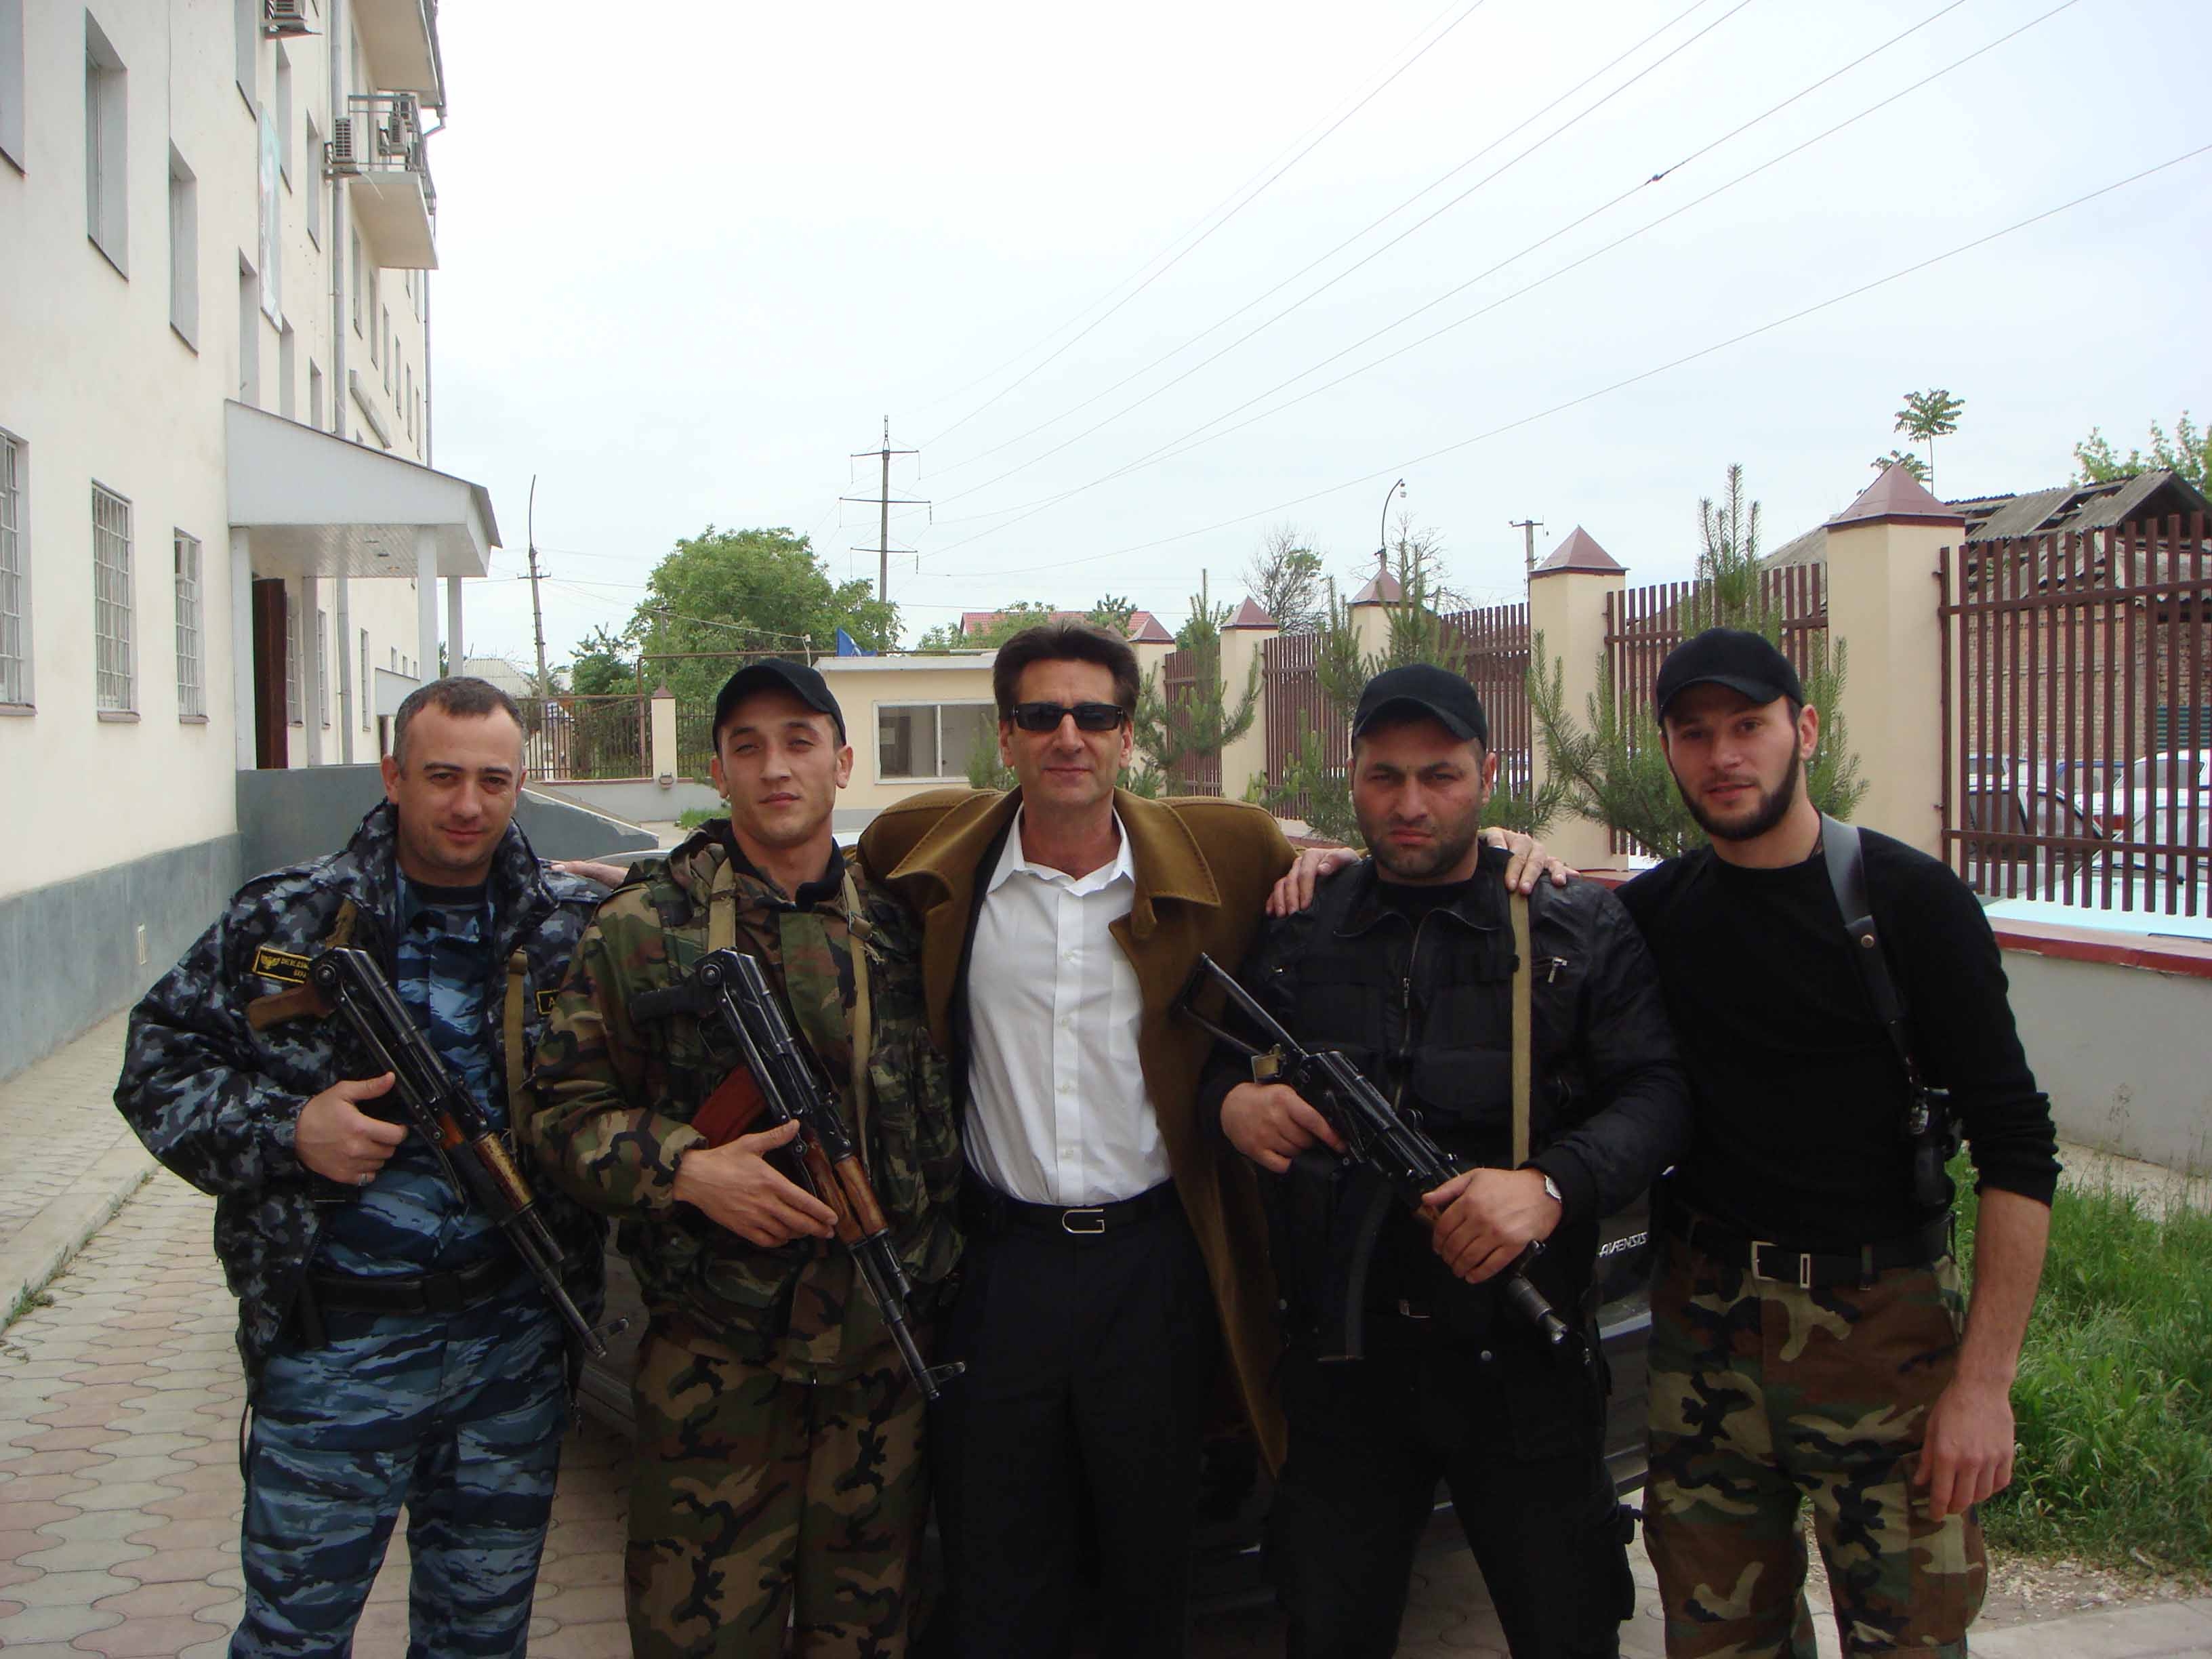 Bob Van Ronkel and his personal security in Chechnya, 2008.